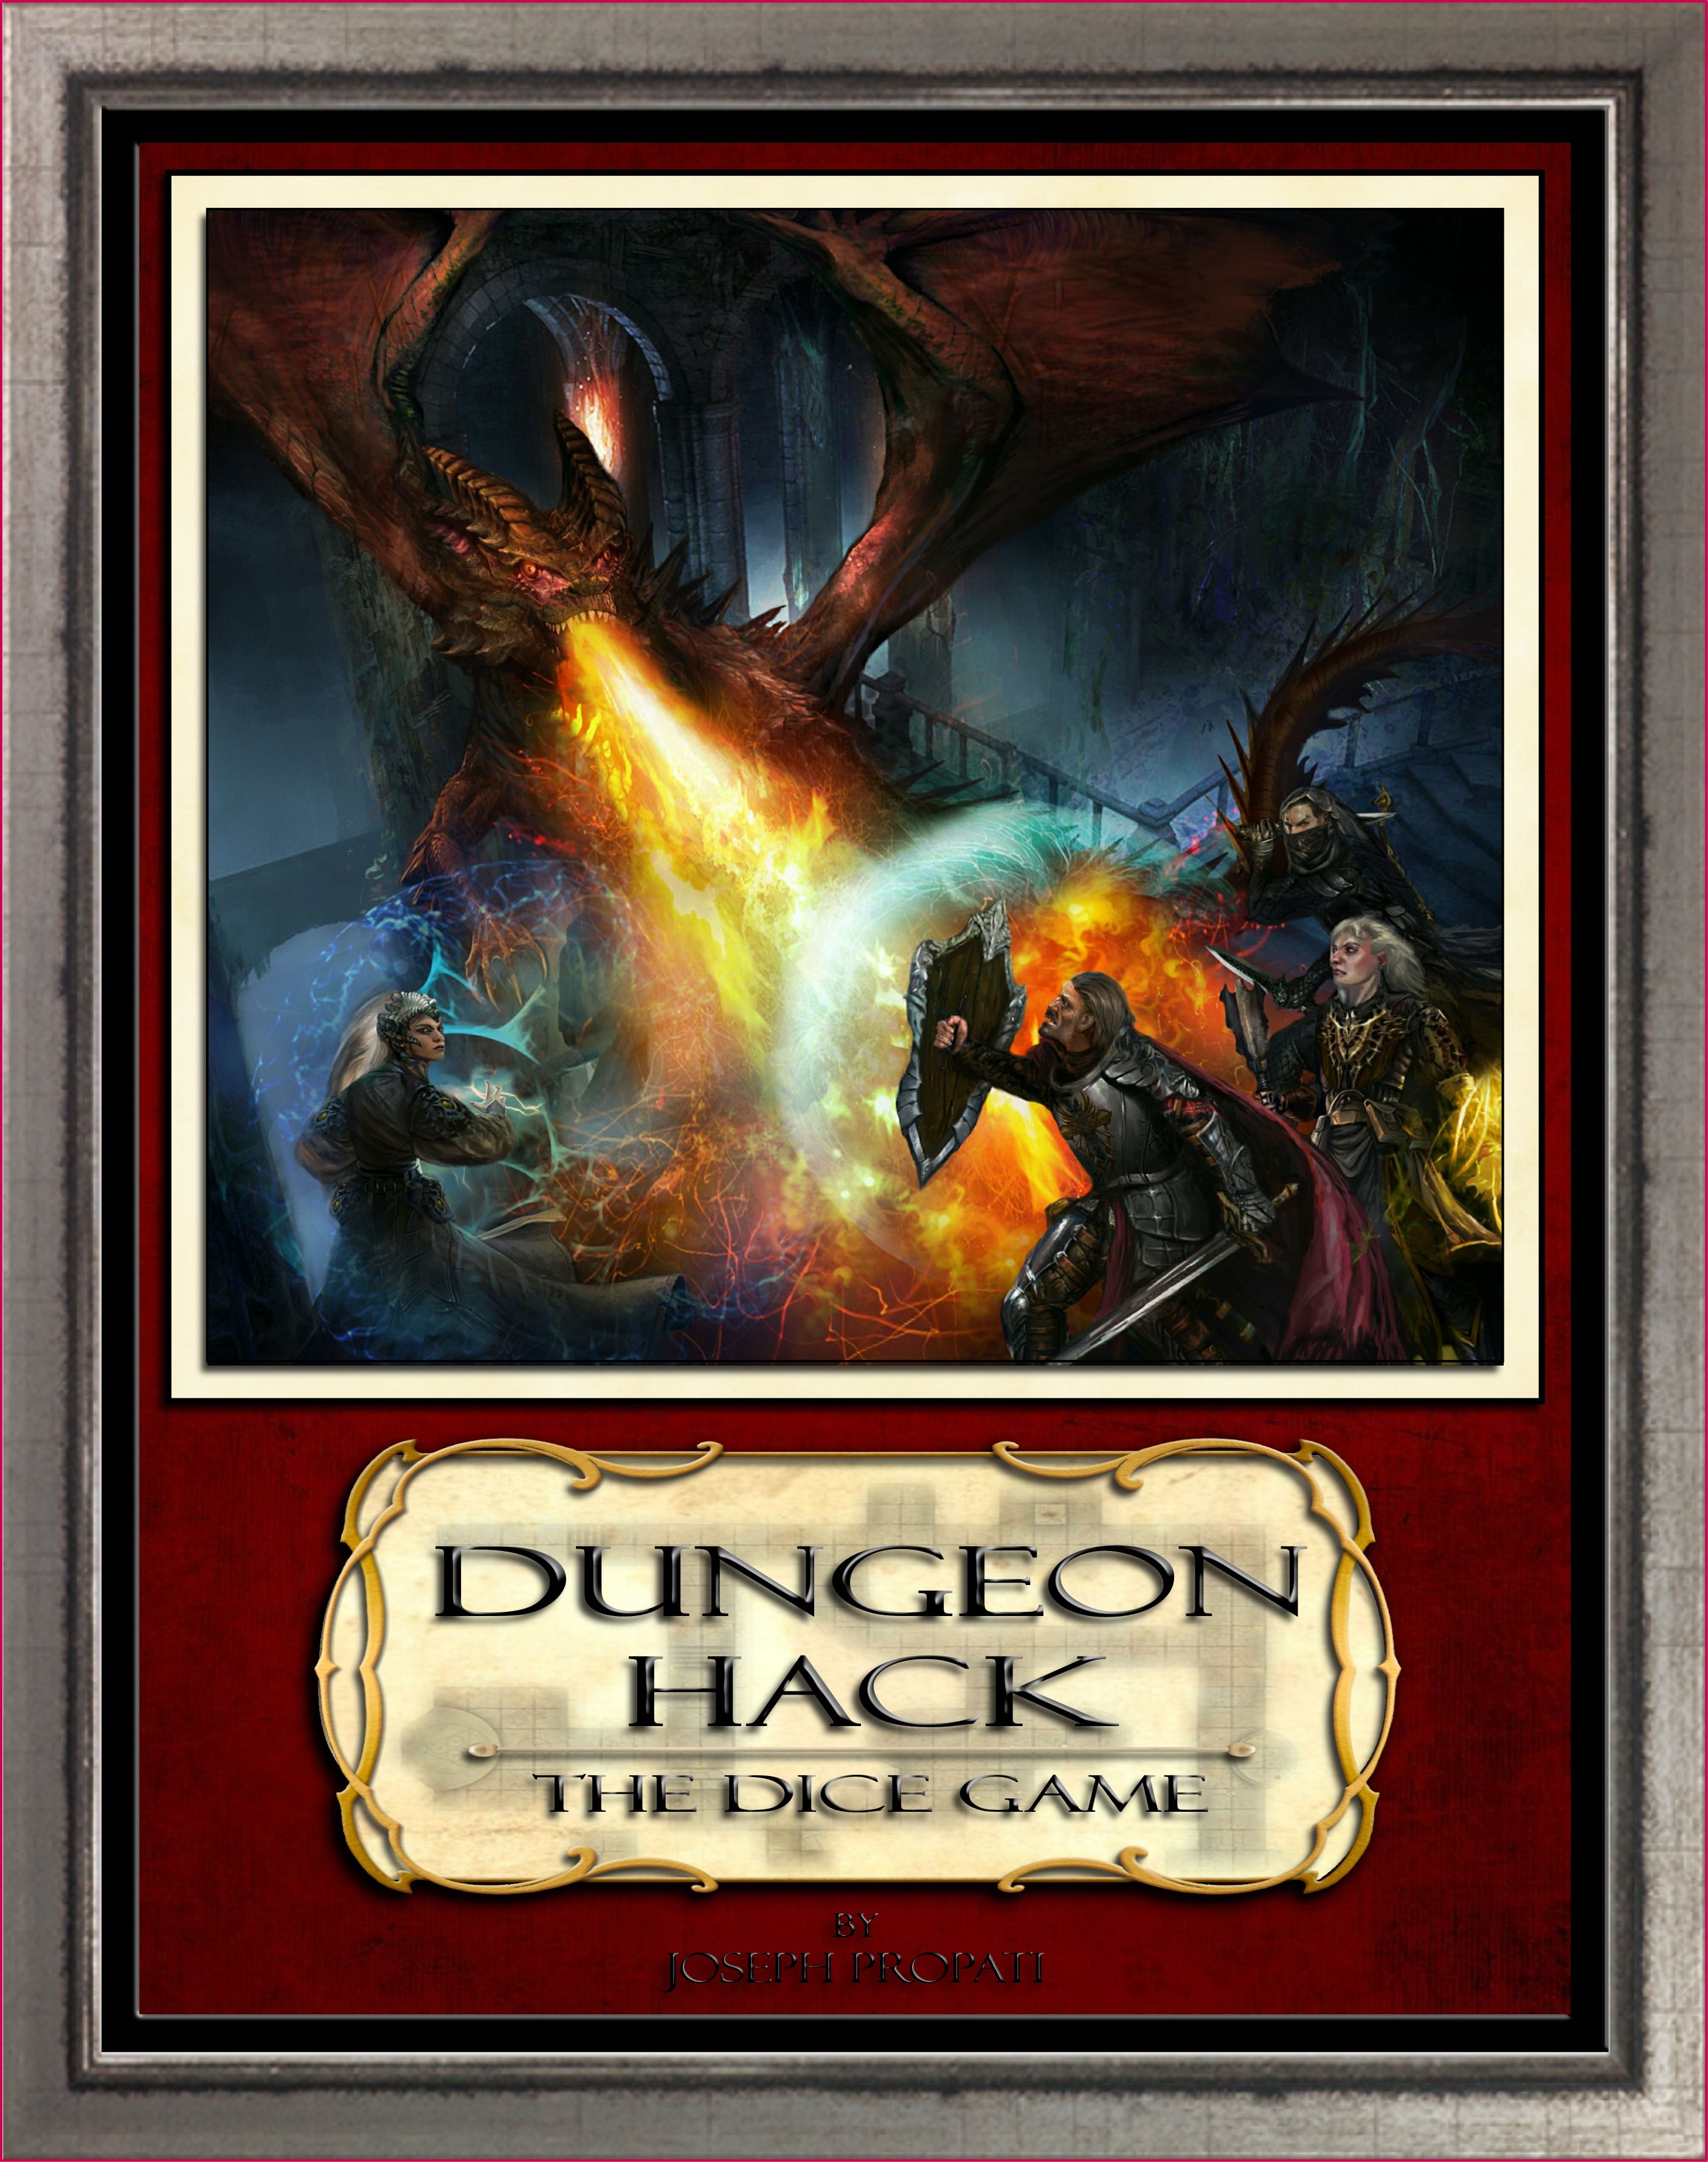 Dungeon Hack: The Dice Game